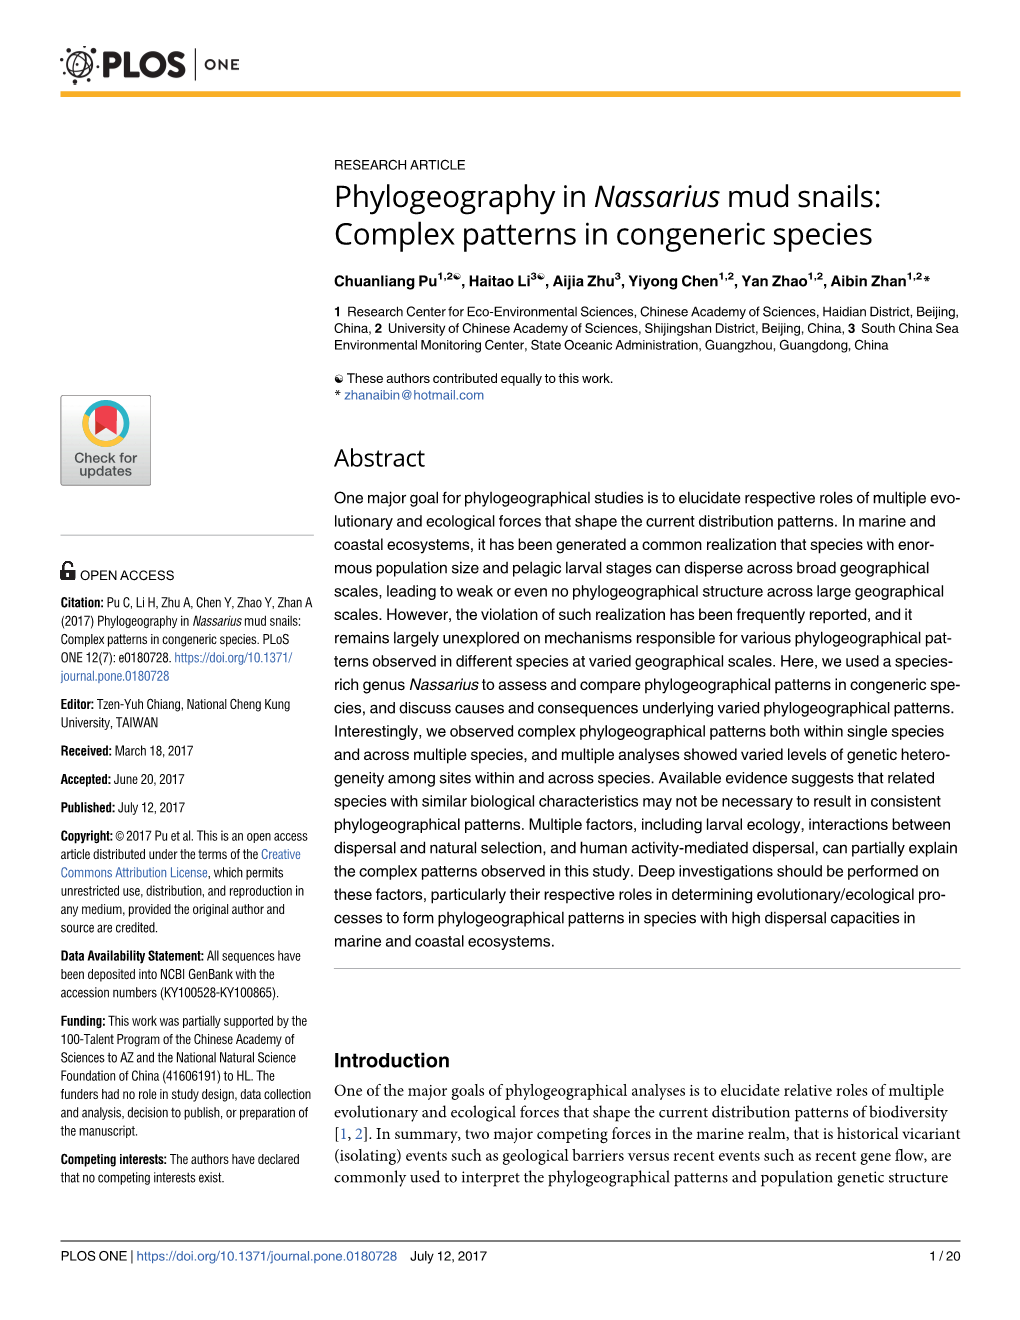 Phylogeography in Nassarius Mud Snails: Complex Patterns in Congeneric Species